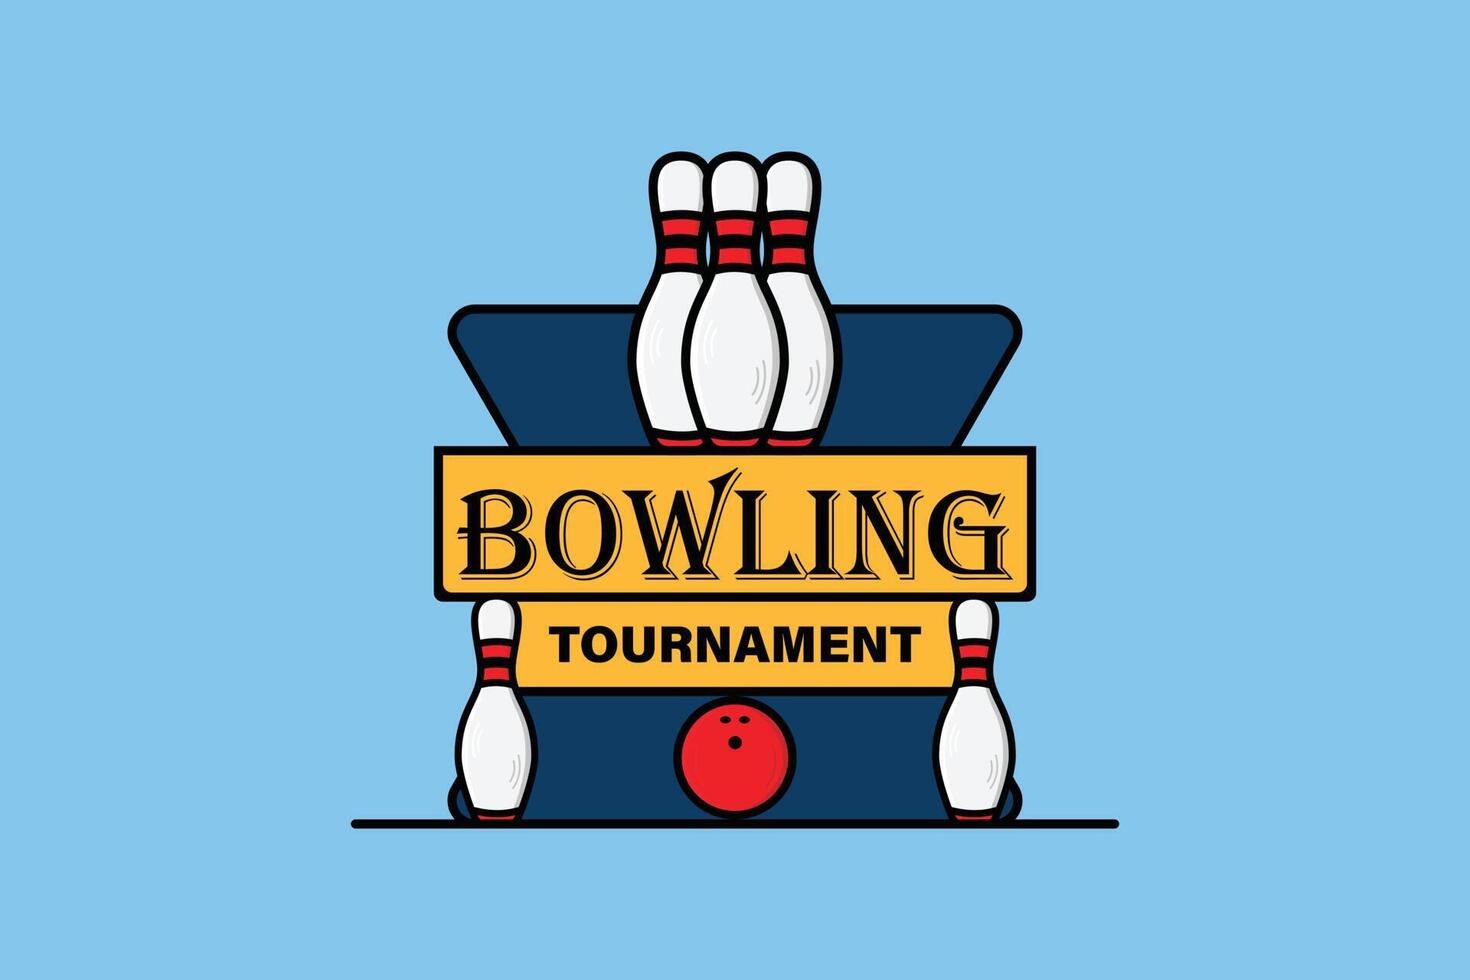 Professional Bowling Tournament badge logo design. Sport object icon concept. Bowling logo template design. Bowling ball and pins icon design. vector